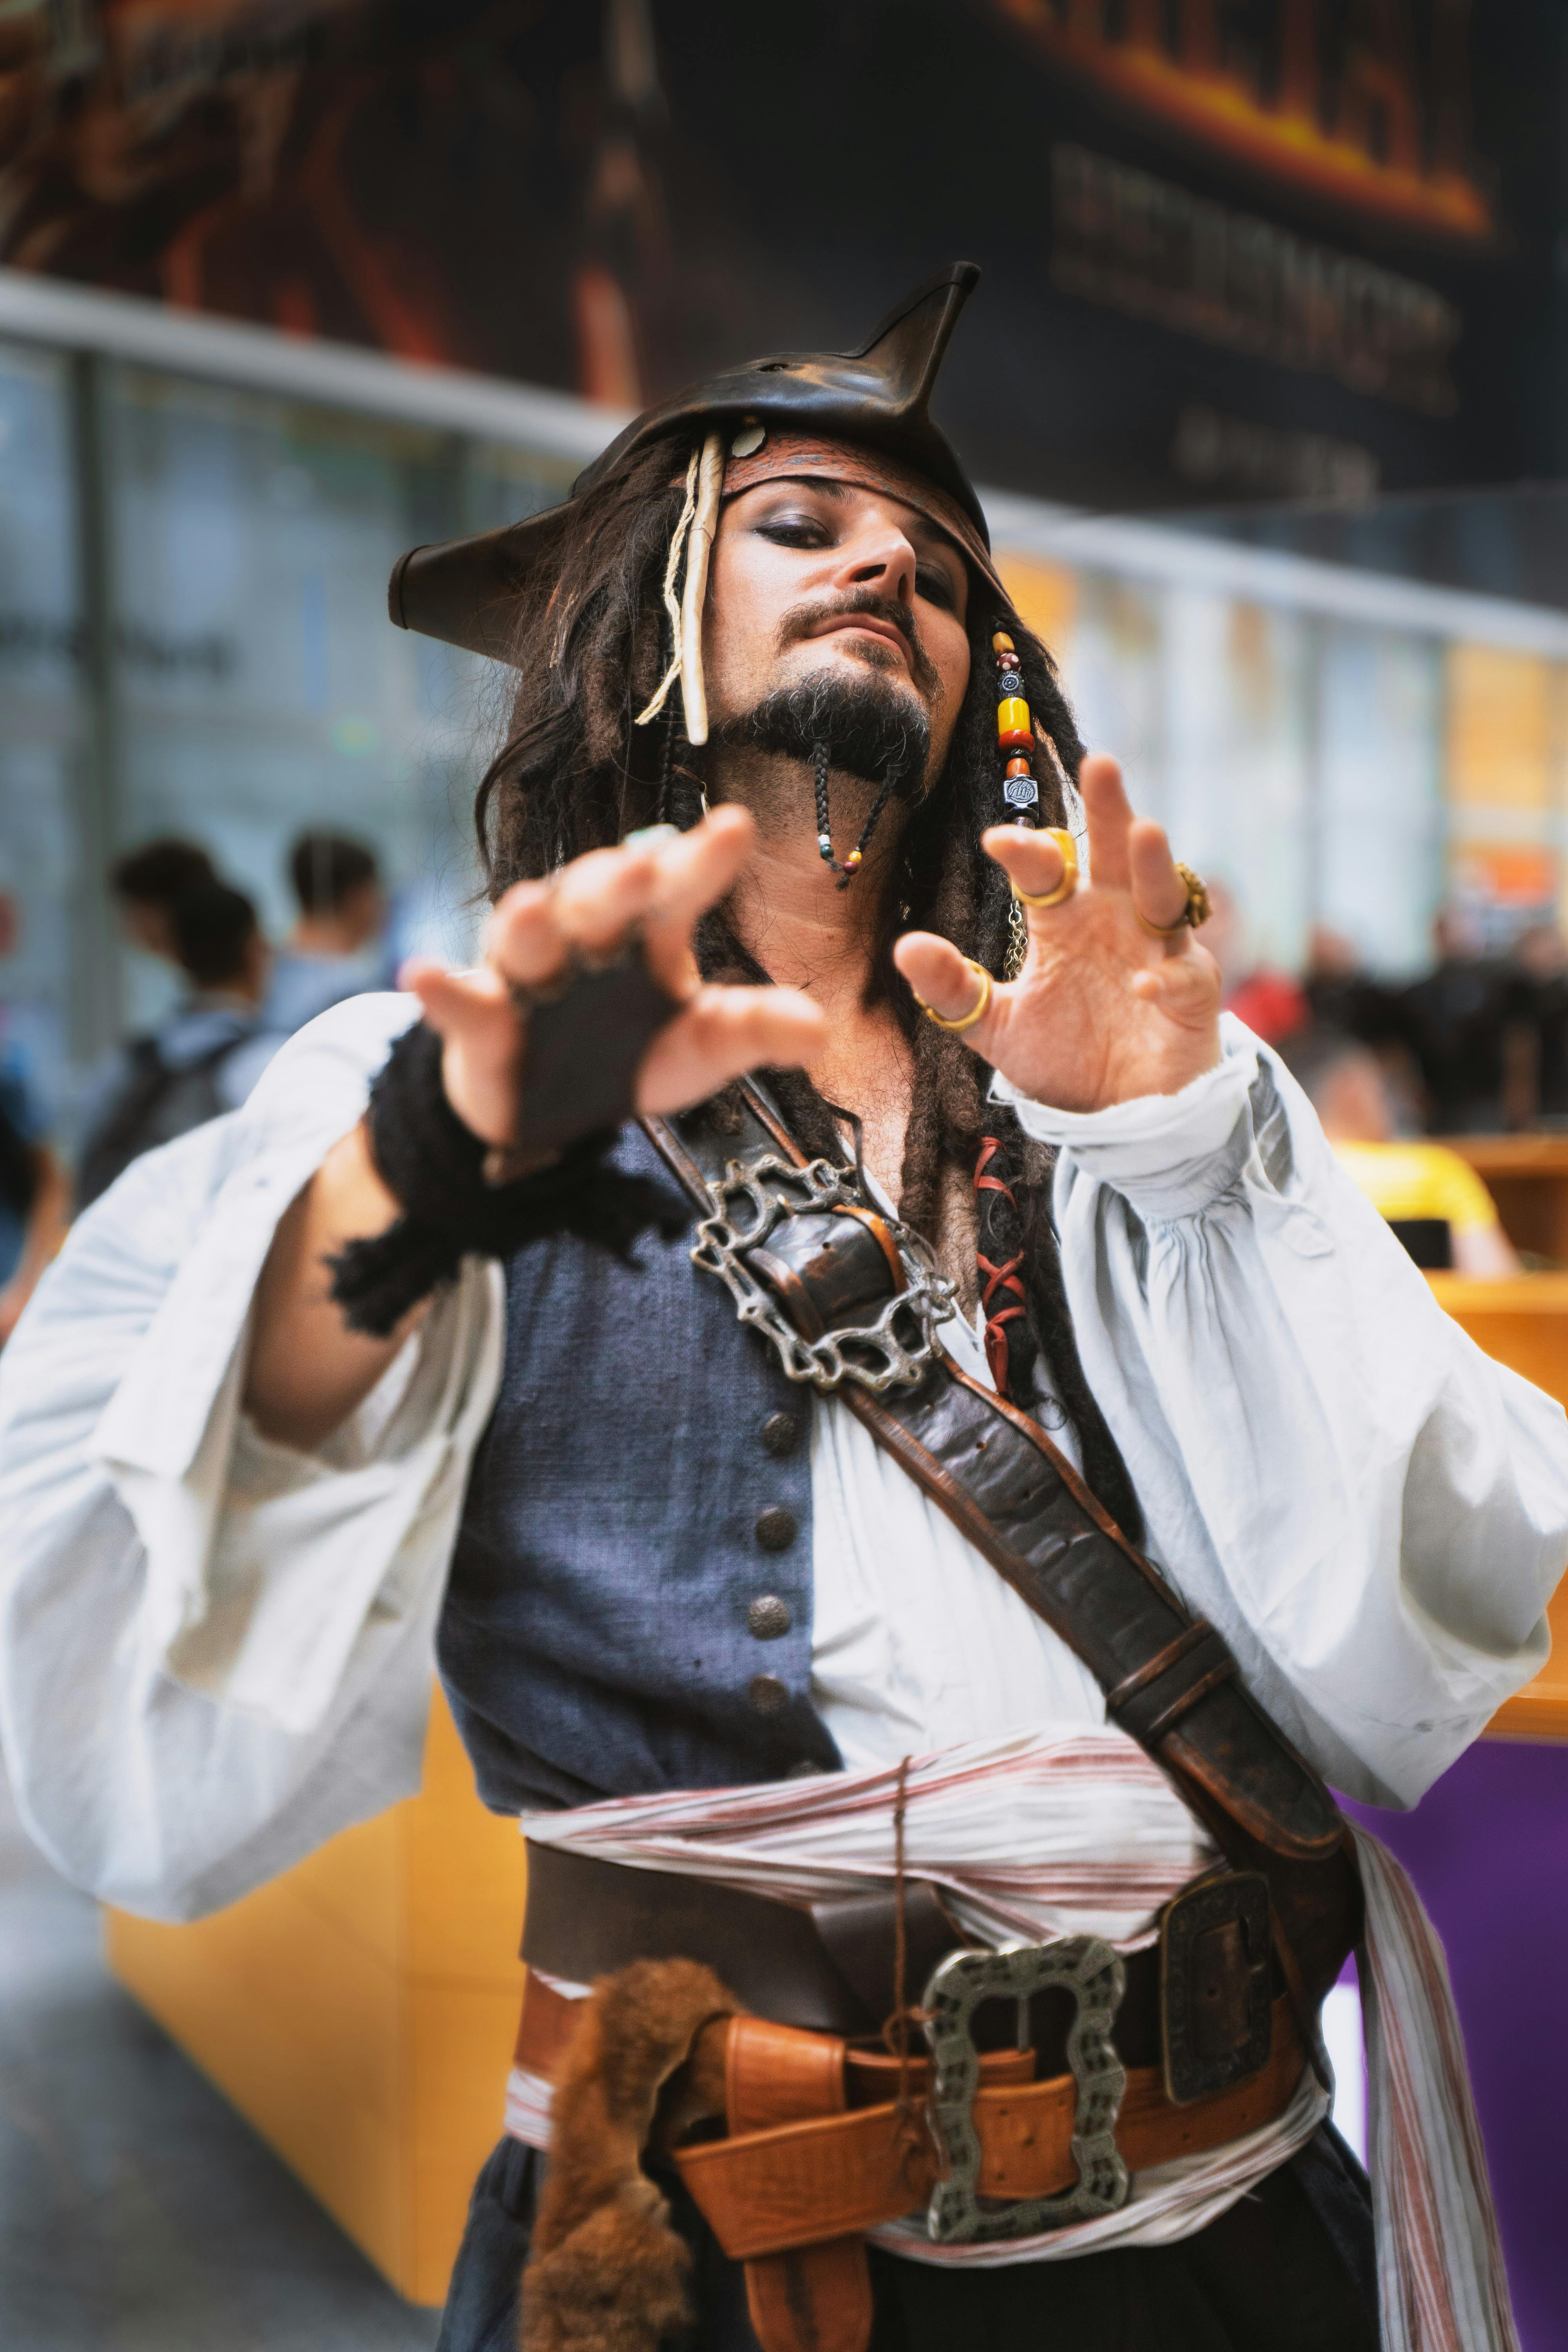 Pirate Photos, Download The BEST Free Pirate Stock Photos & HD Images